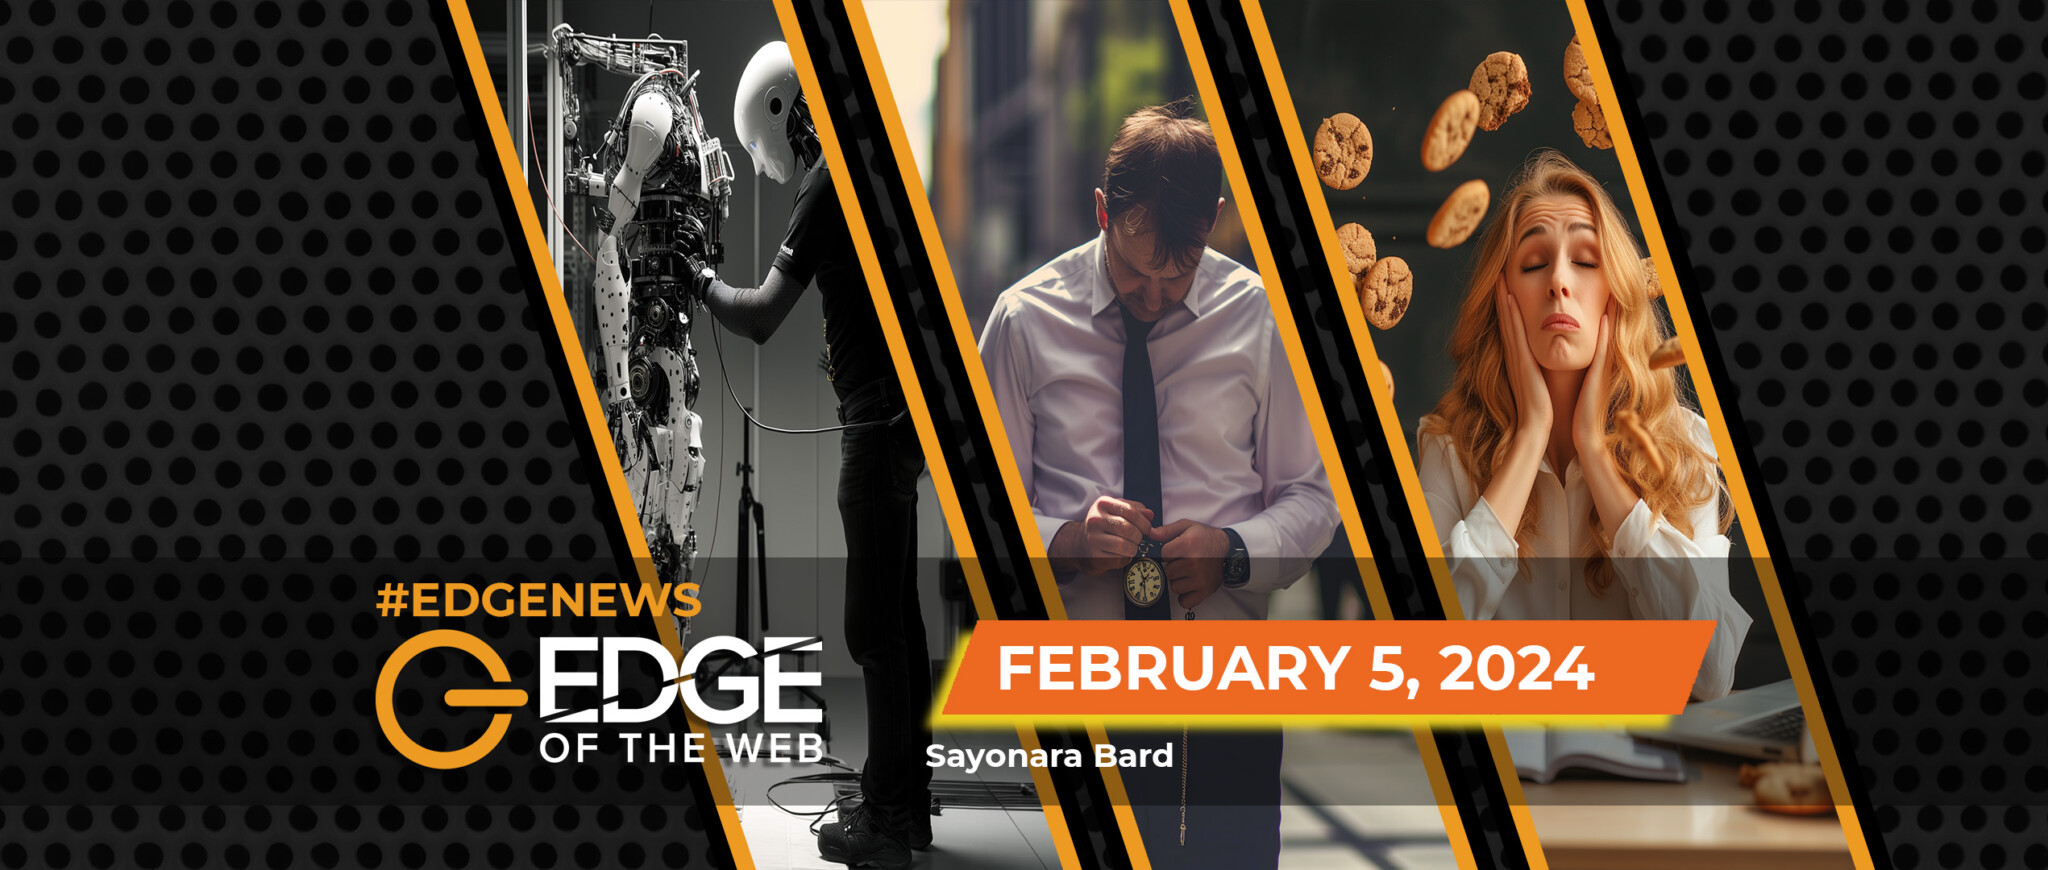 659 | News from the EDGE | Week of 2.5.2024